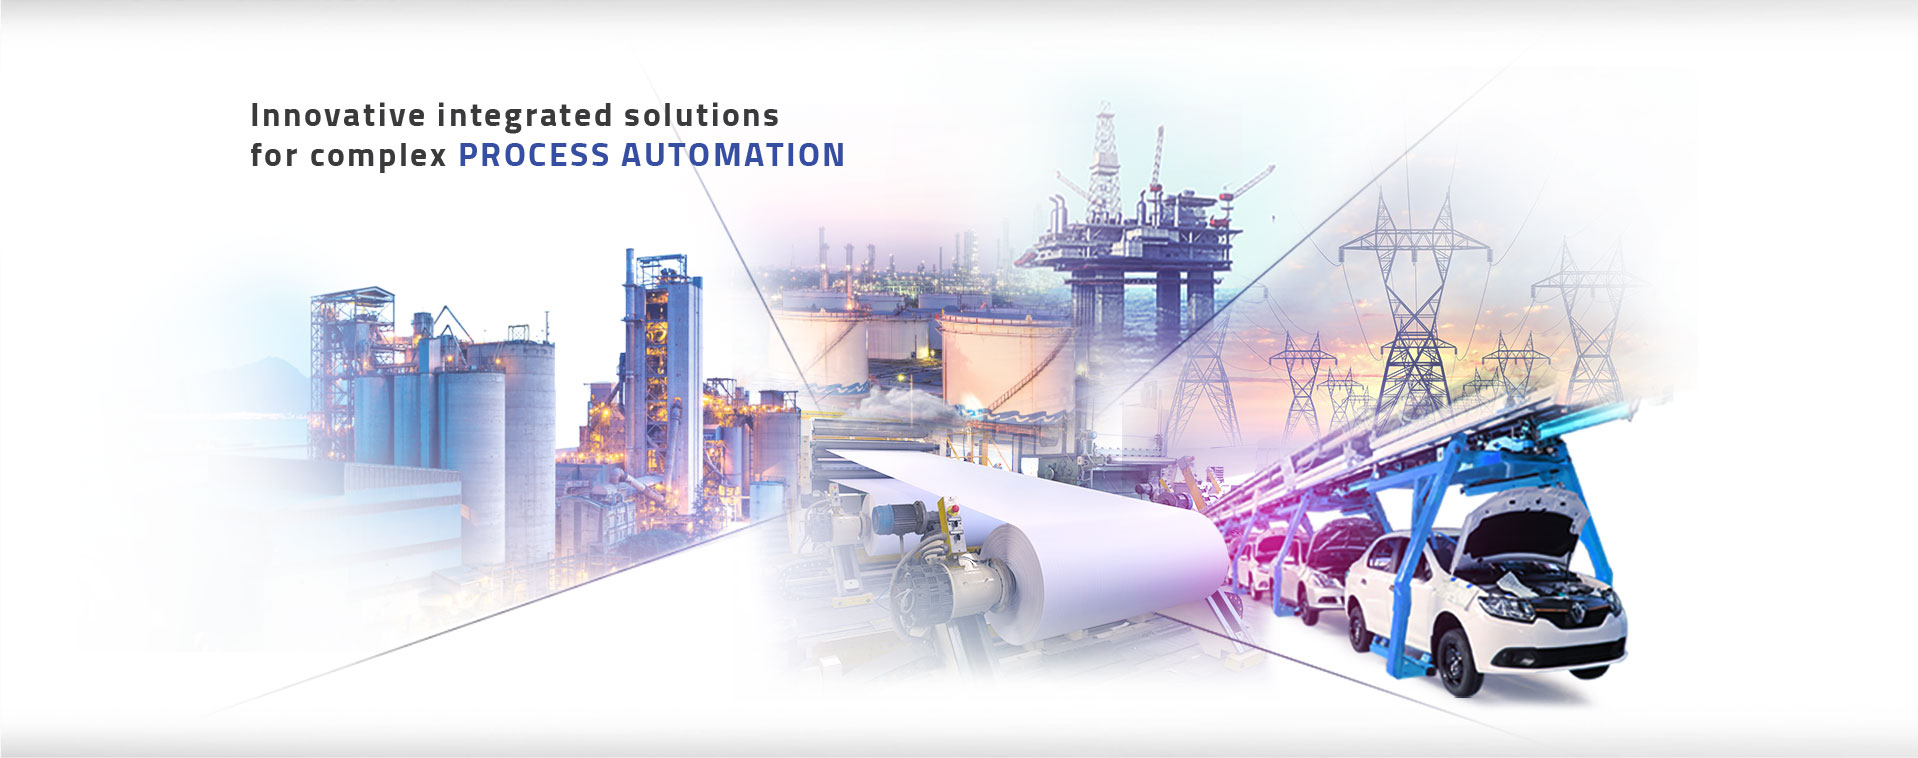 industrial automation